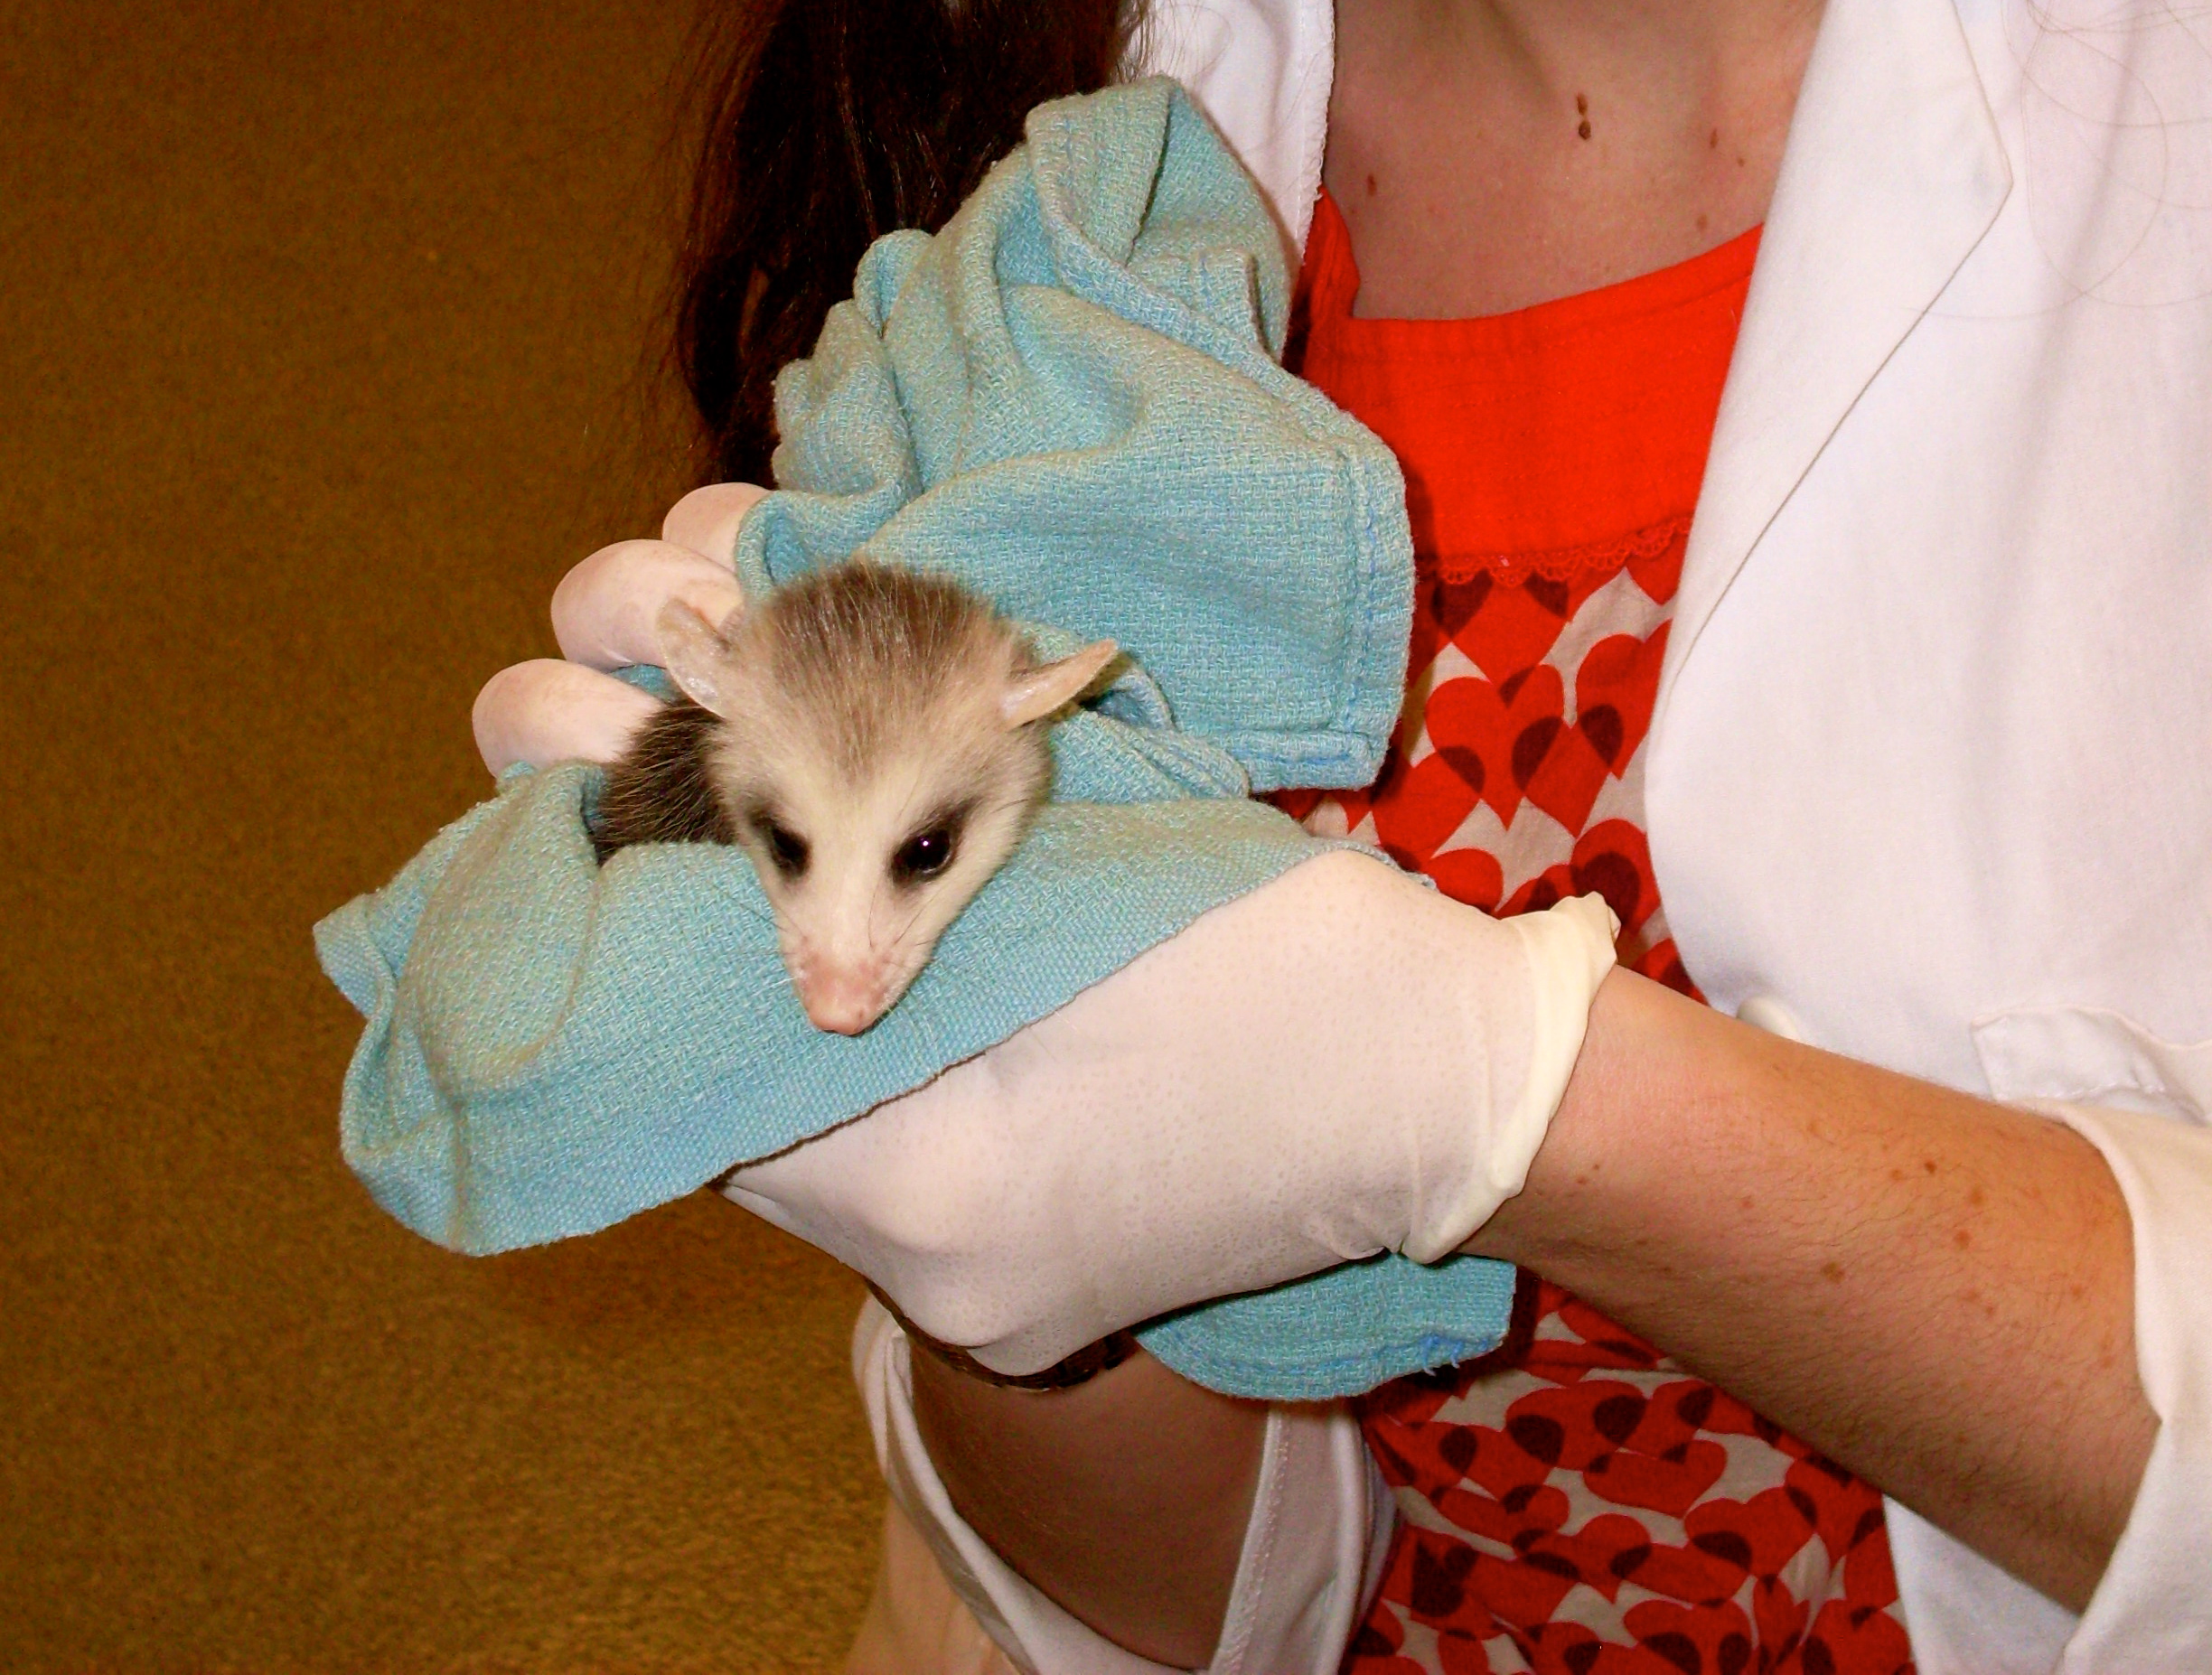 One of my more recent opossum patients!  This little one (along with a very cute baby sister) was orphaned and sent out to a local rehabber to eventually be released back into the wild.